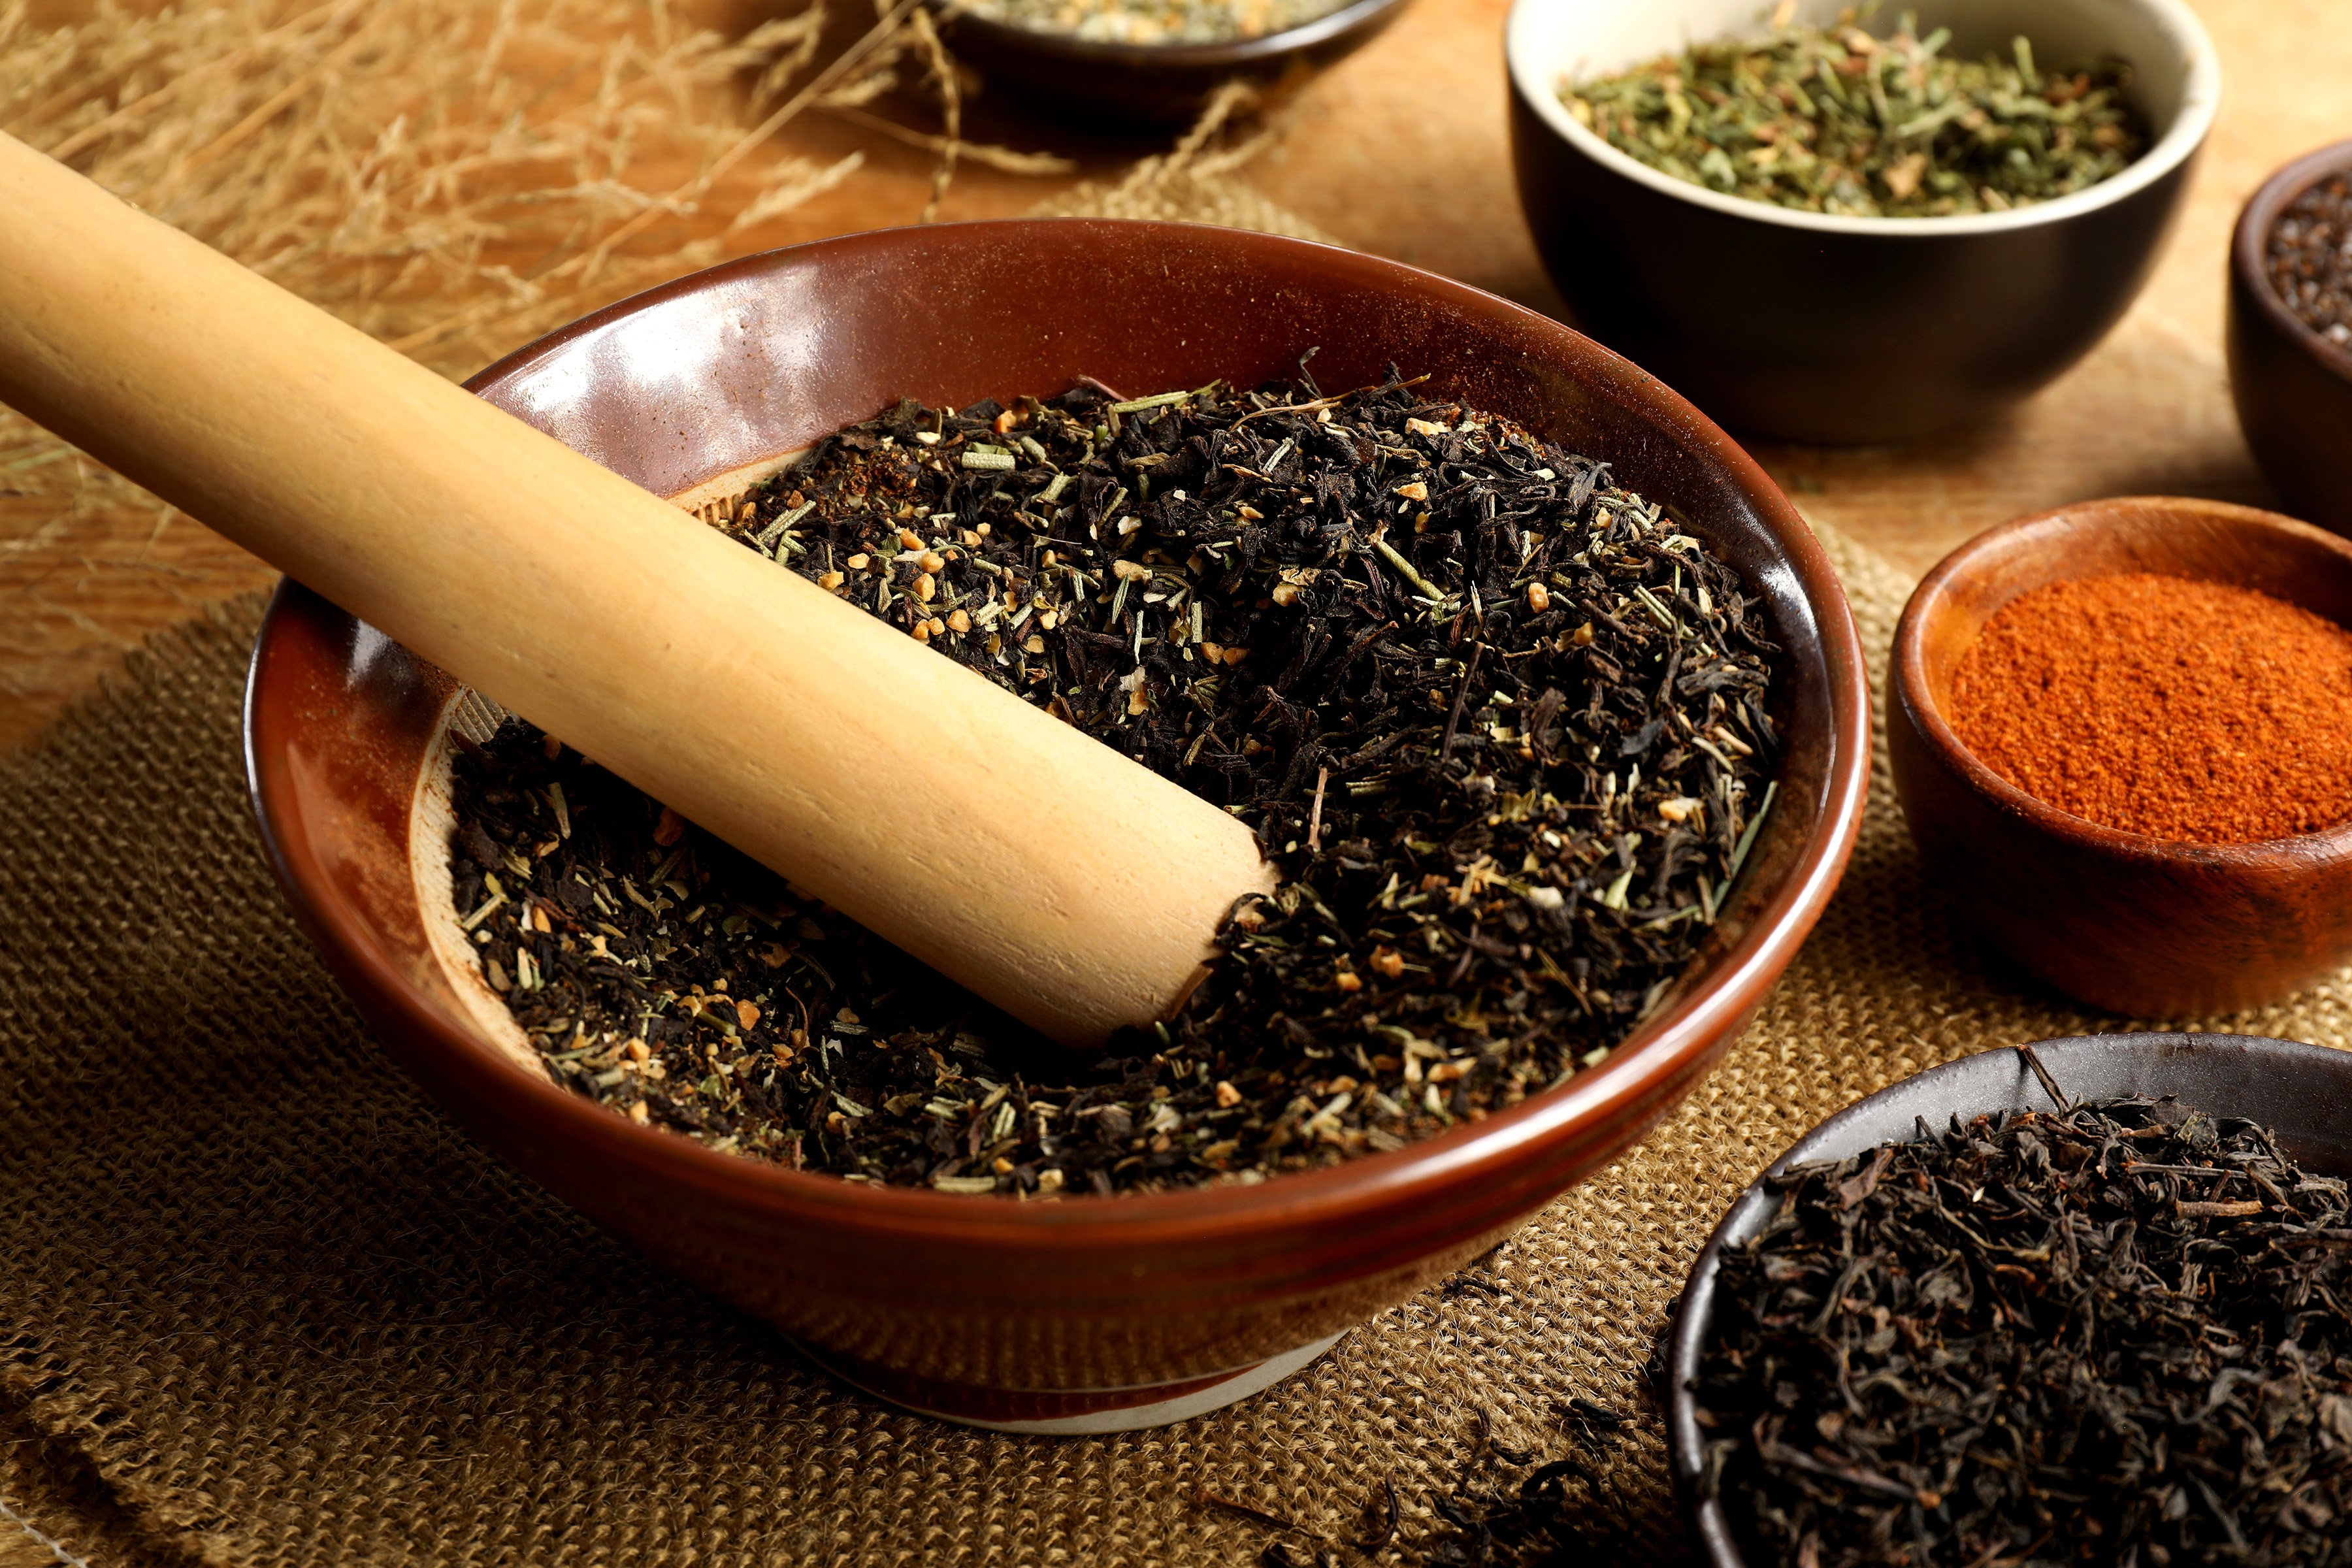 Lapsang souchong can be combined with herbs and spices to create a dry rub or delicious marinade for grilling. Using a suribachi, herbs and spices like cayenne pepper, parsley, and thyme are blended together.